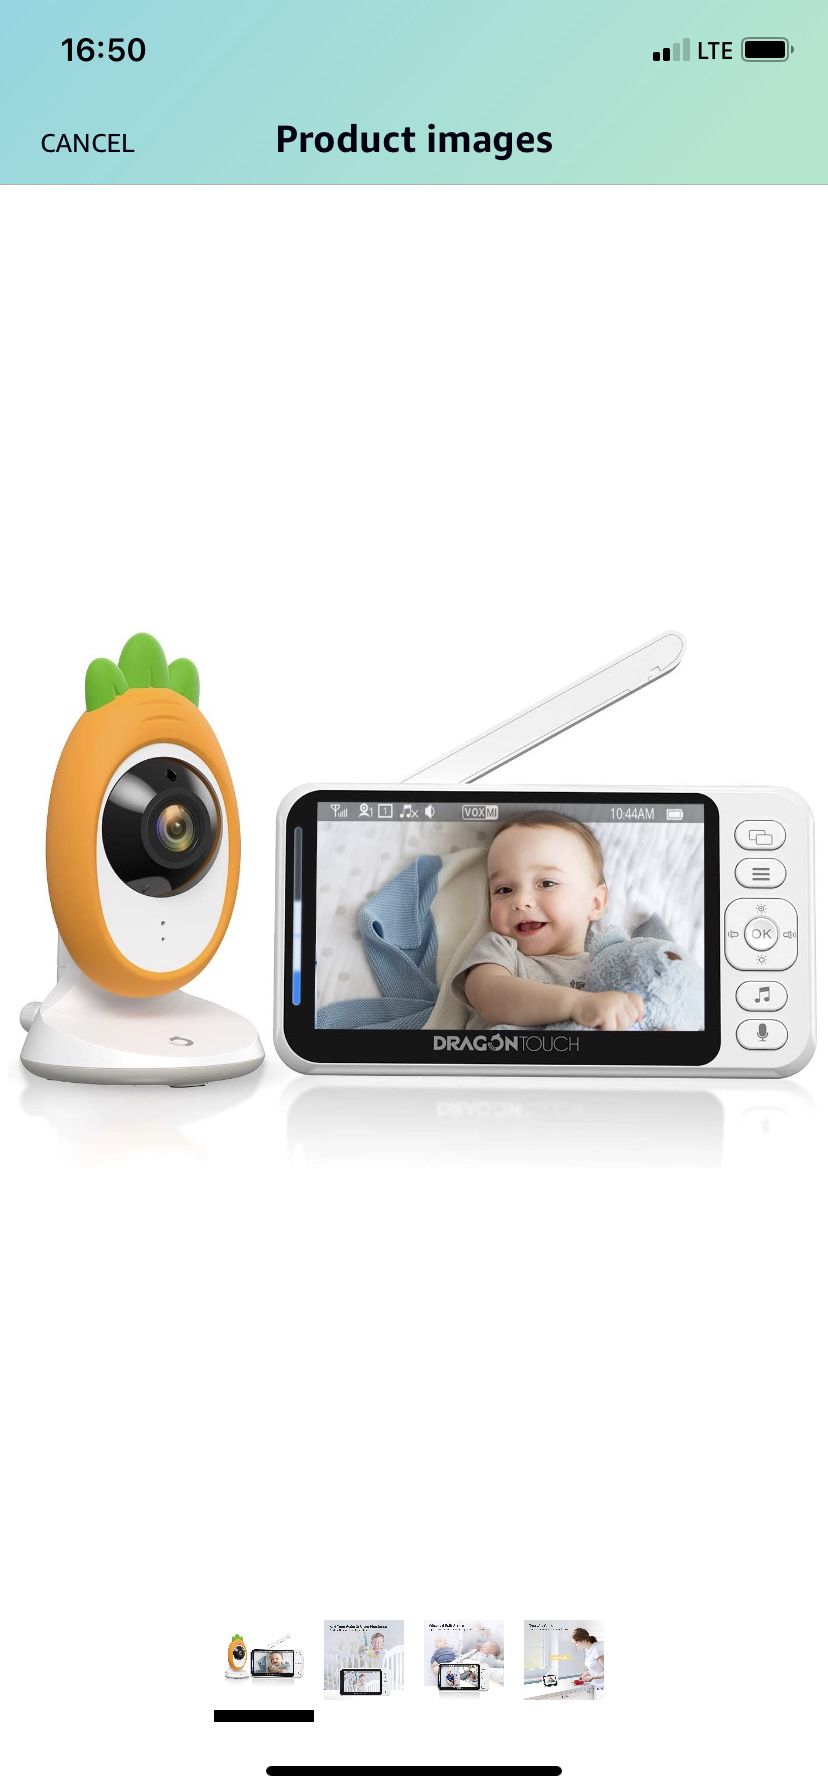 Video Baby Monitor, Dragon Touch E40 4.3" HD LCD Display with Camera, Two-Way Audio, Invisible LED Night Vision, VOX Mode, Split Screen, 960ft Range,